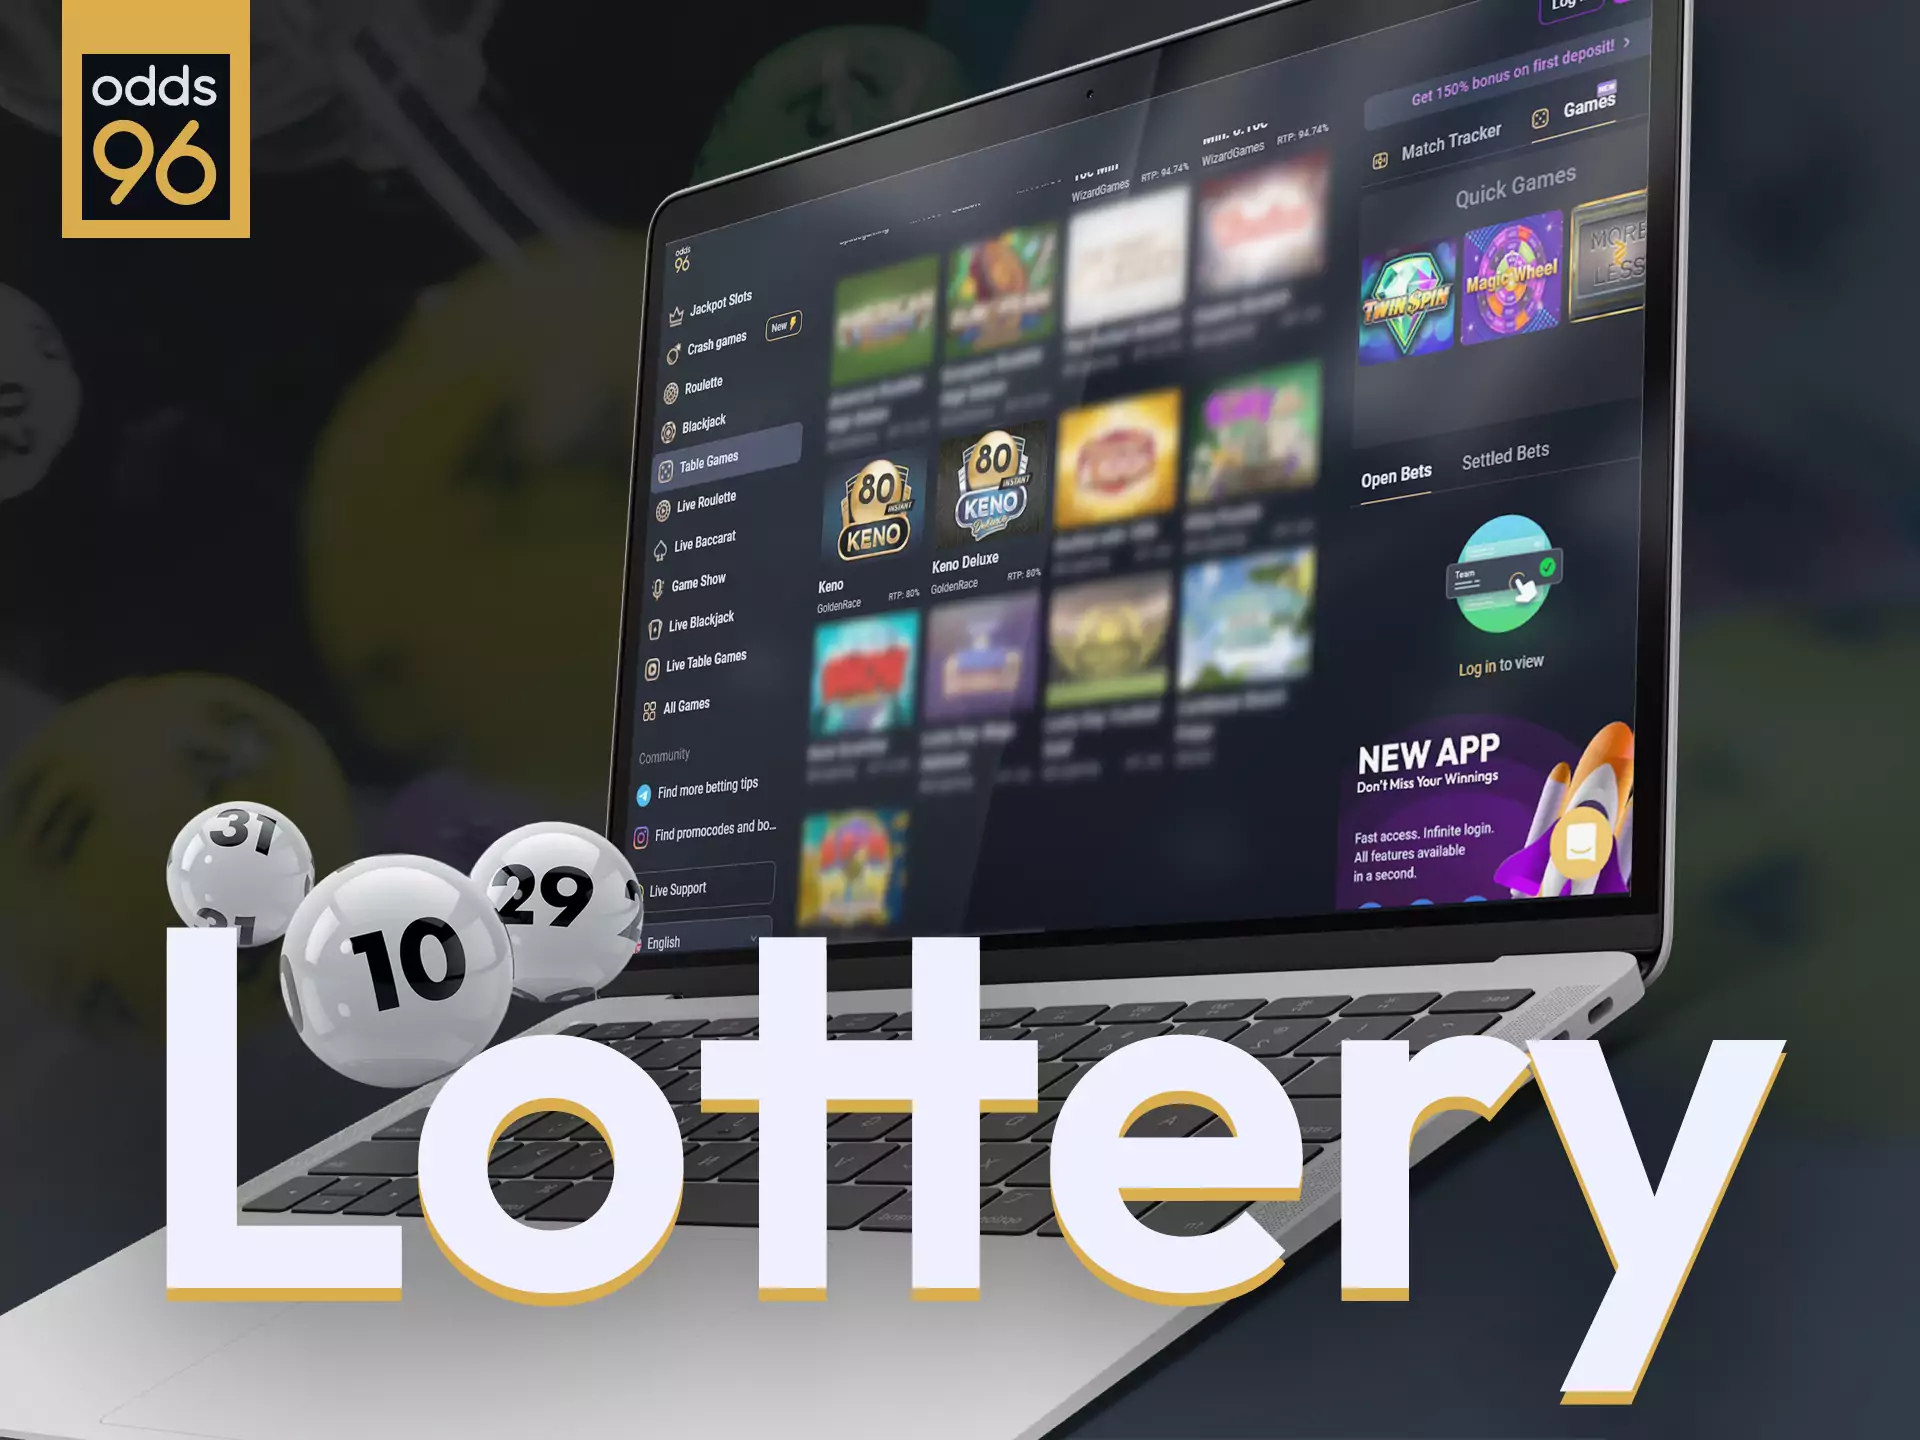 Place bets at Odds96 casino on lotteries.